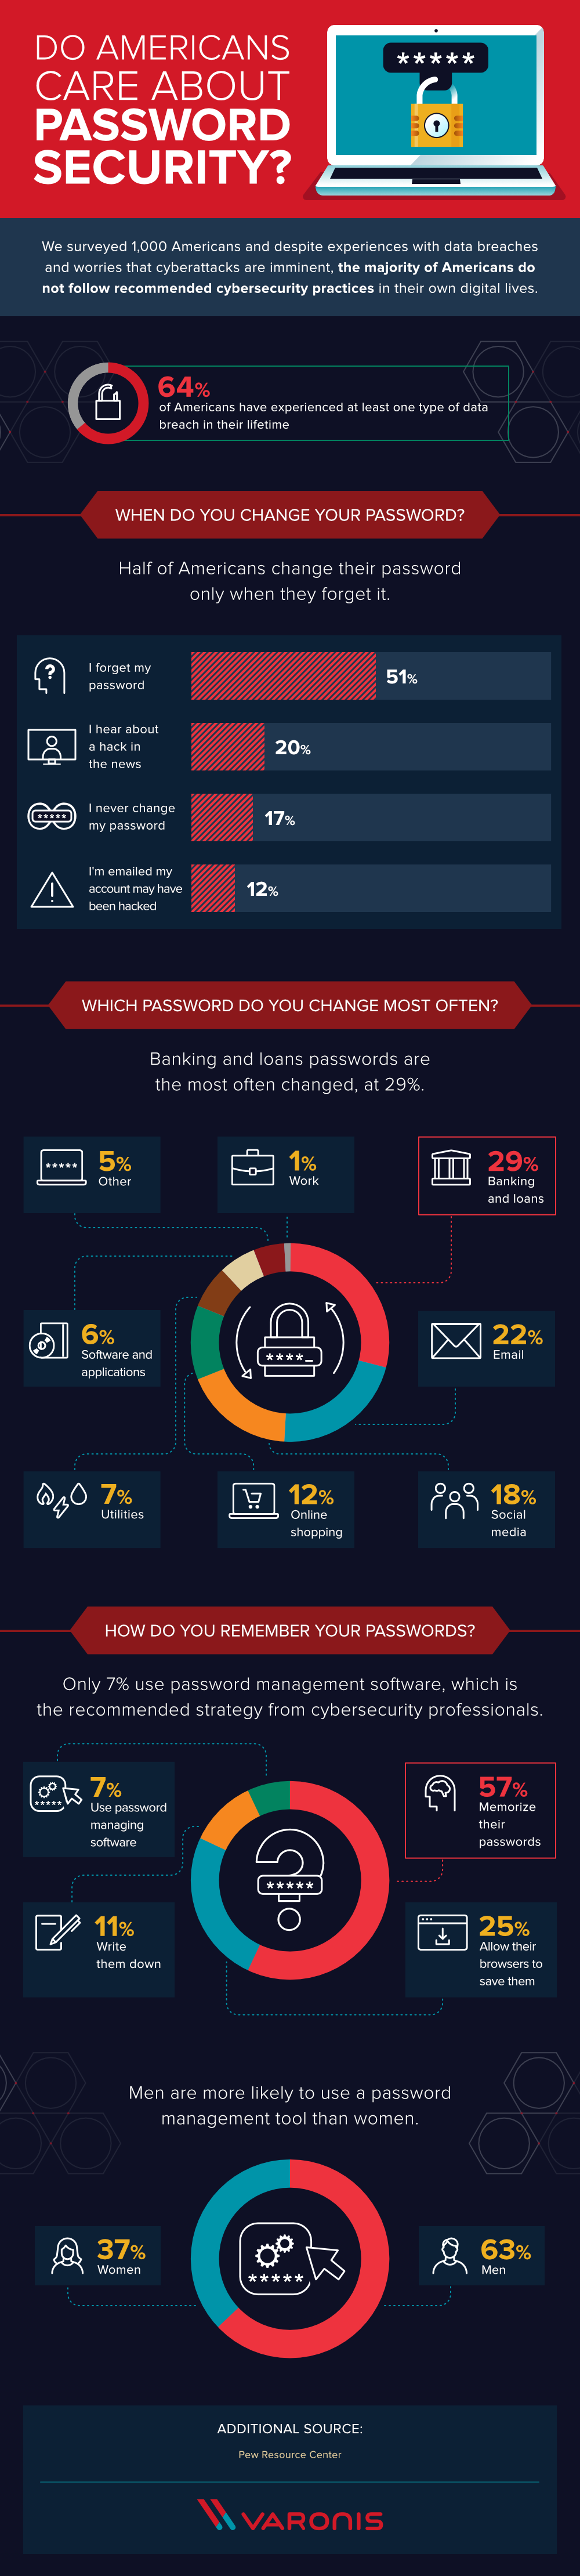 Do Americans Ever Change Their Passwords? #infographic